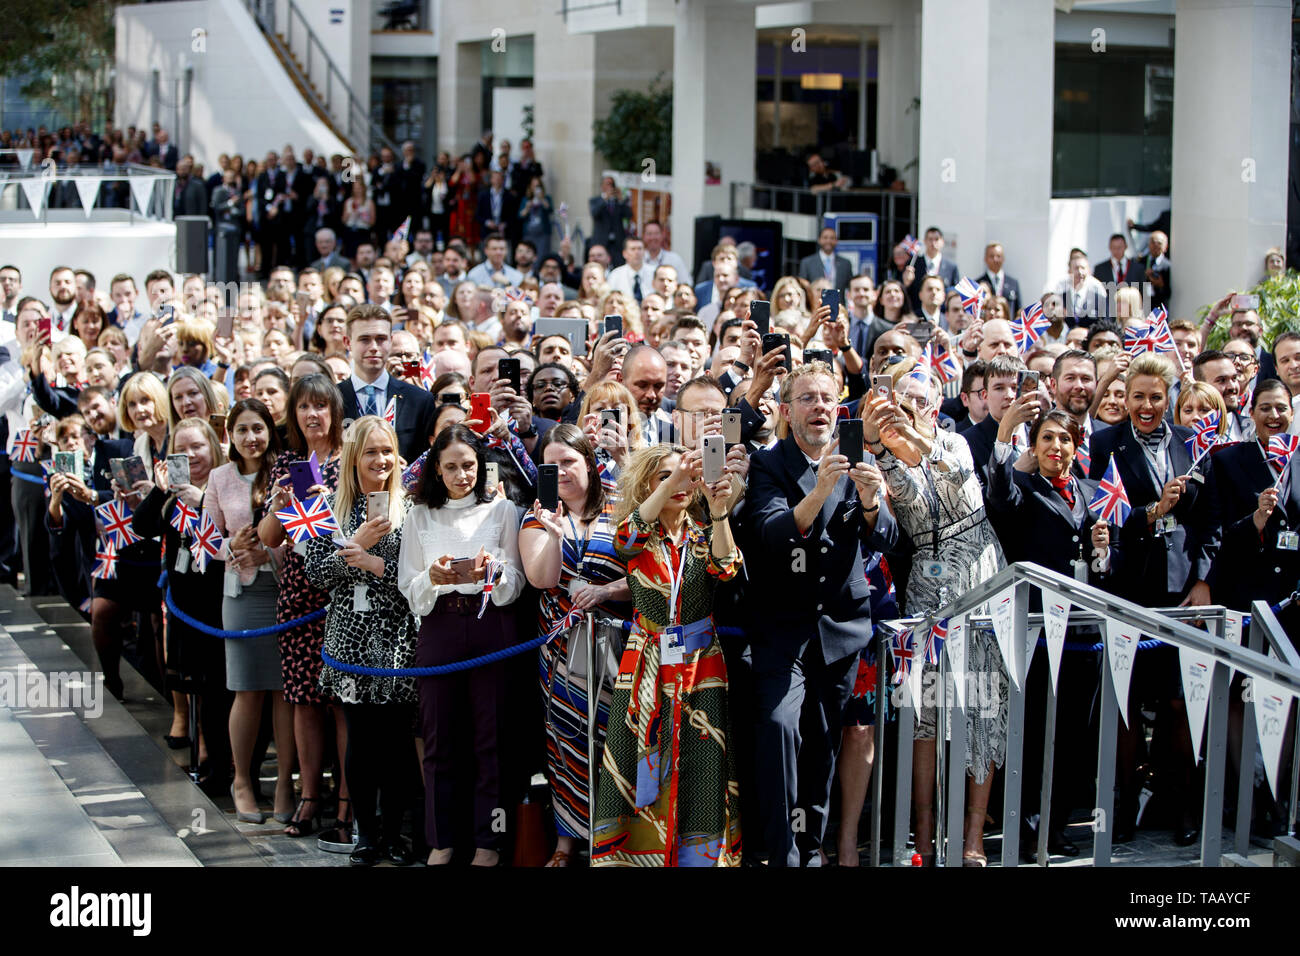 Staff wait to see Queen Elizabeth II during her visit to the headquarters of British Airways at Heathrow Airport, London, to mark their centenary year. Stock Photo